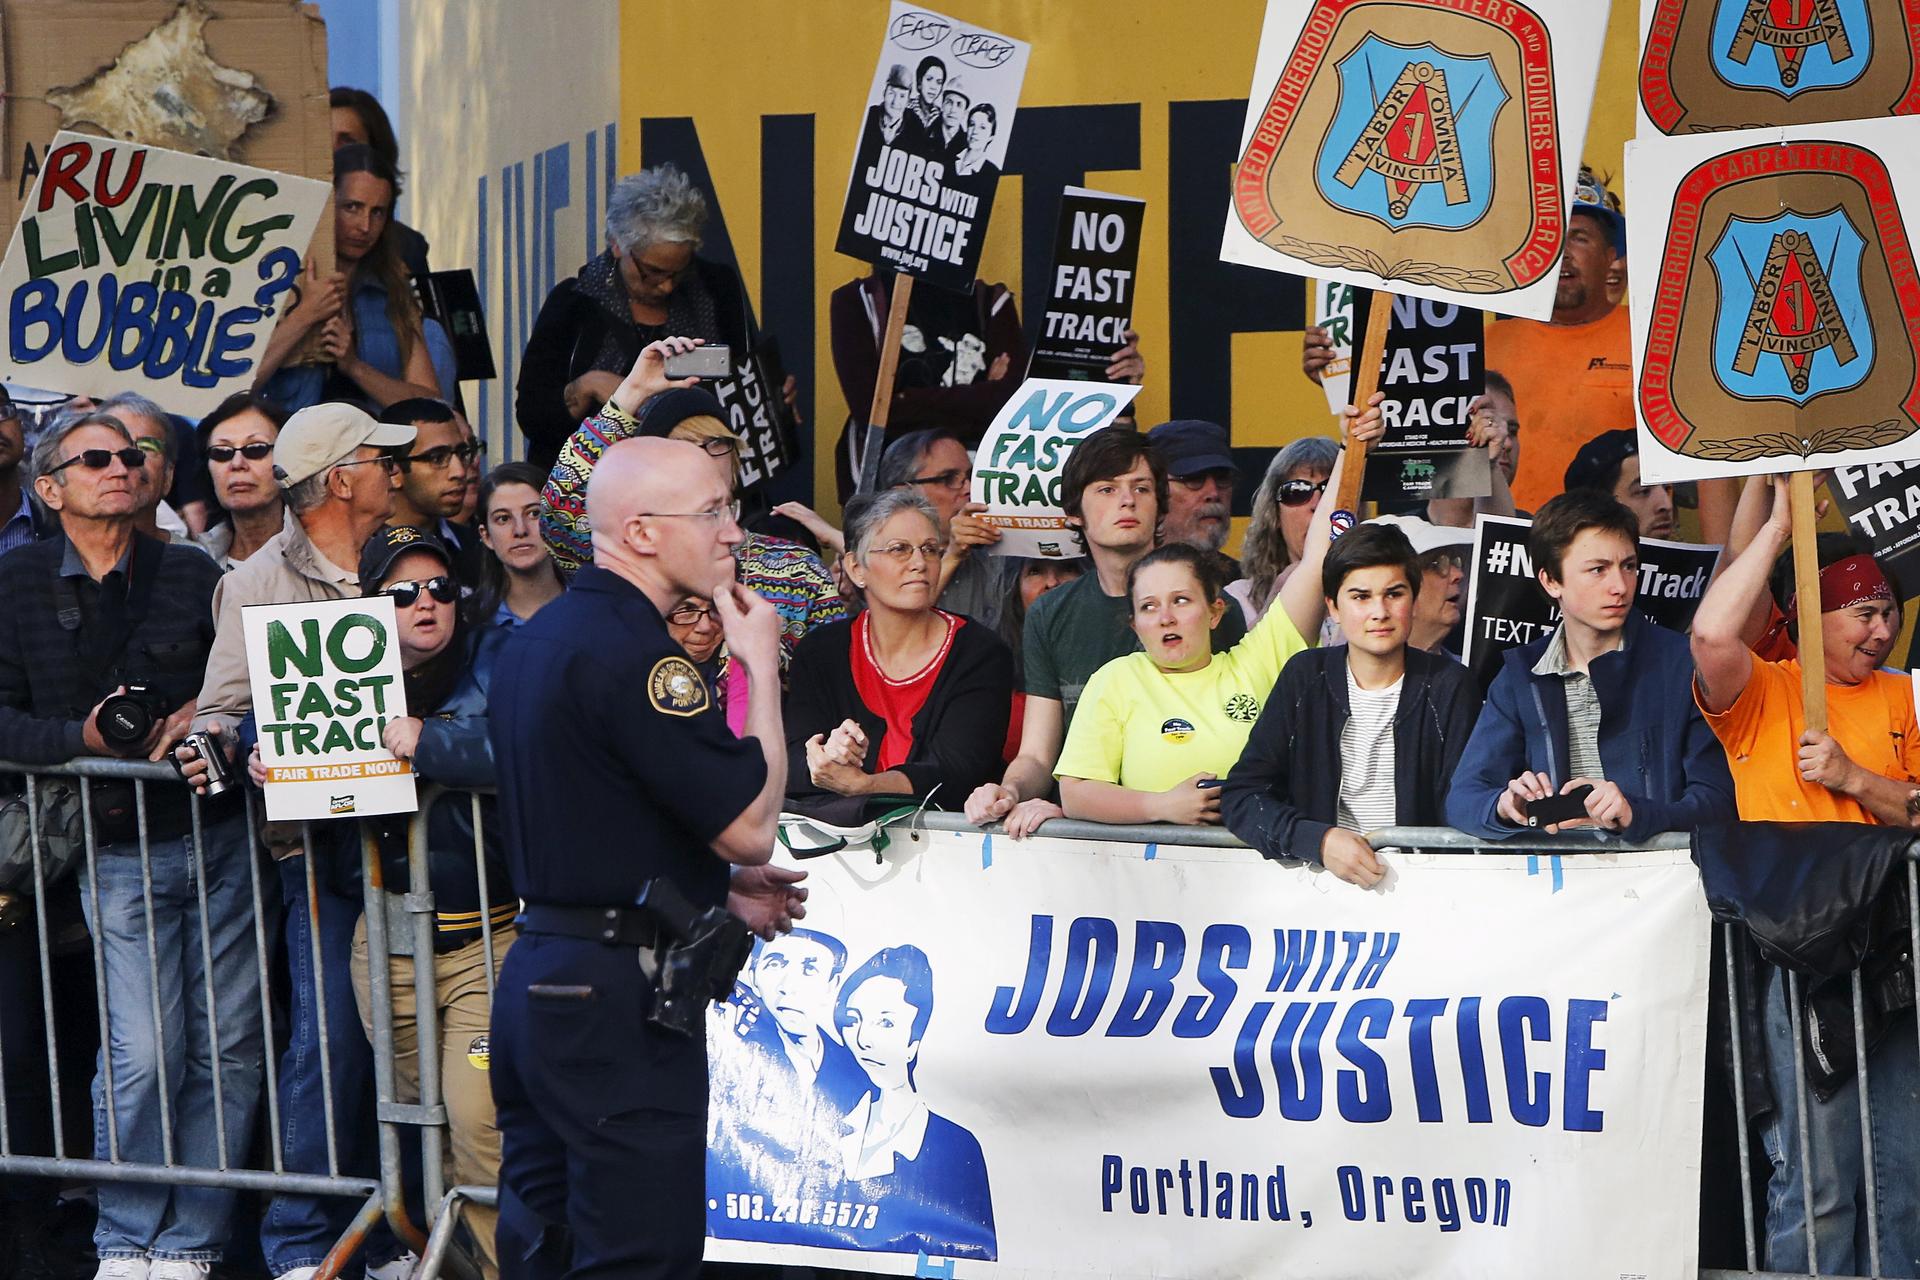 Protesters, many against the fast track trade authority of the Trans-Pacific Partnership trade agreement, rally outside a hotel in Portland, Oregon.